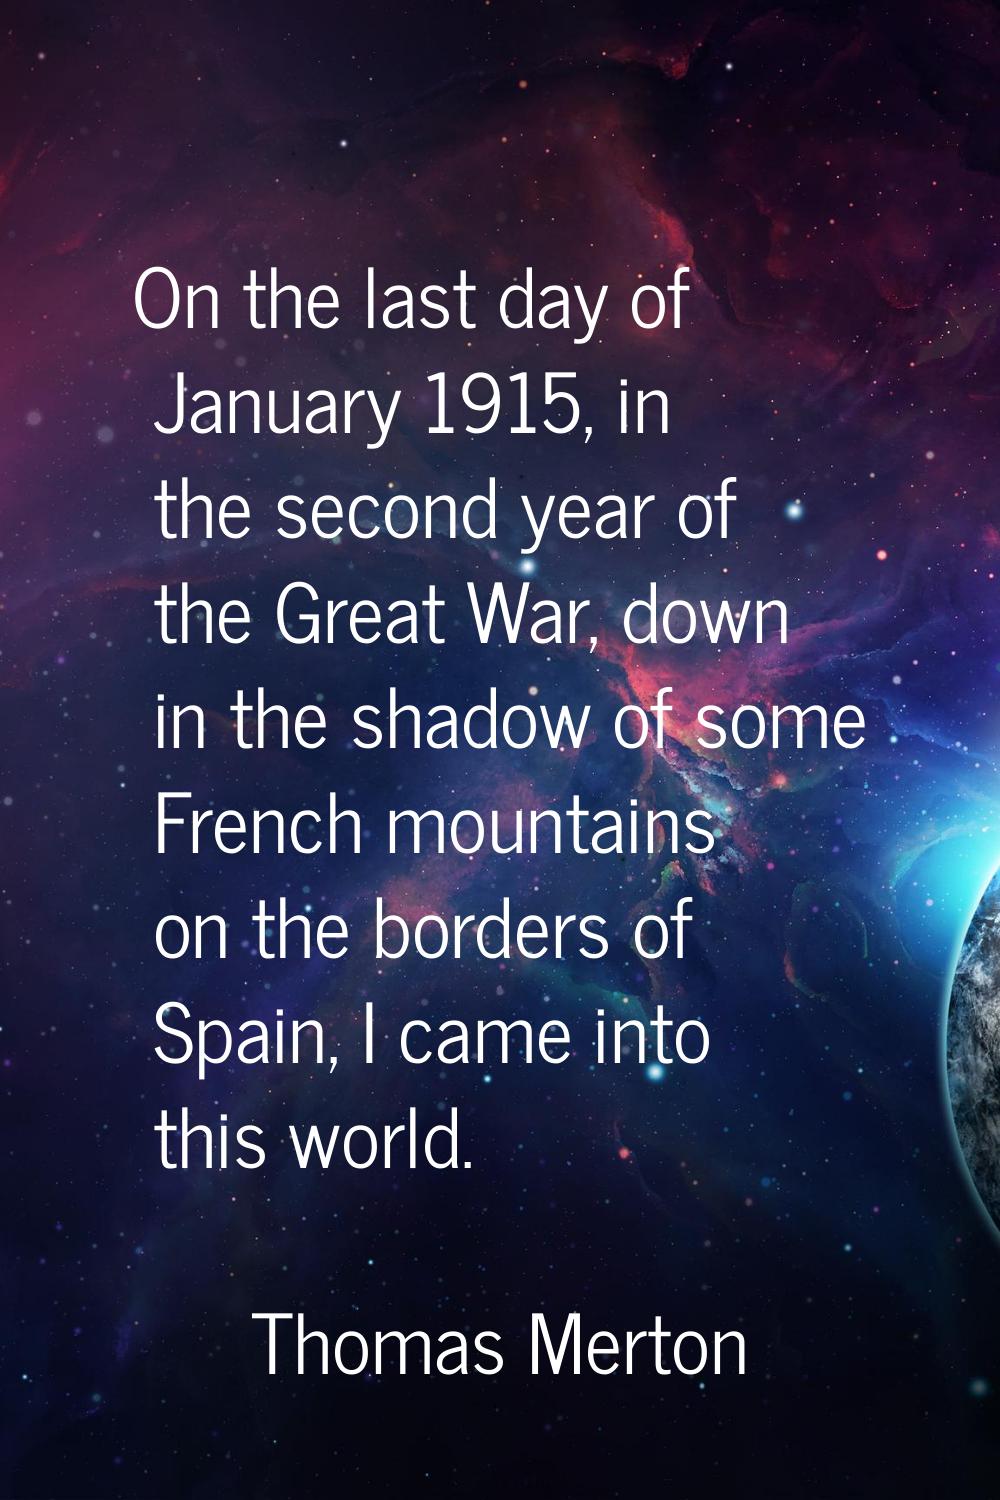 On the last day of January 1915, in the second year of the Great War, down in the shadow of some Fr